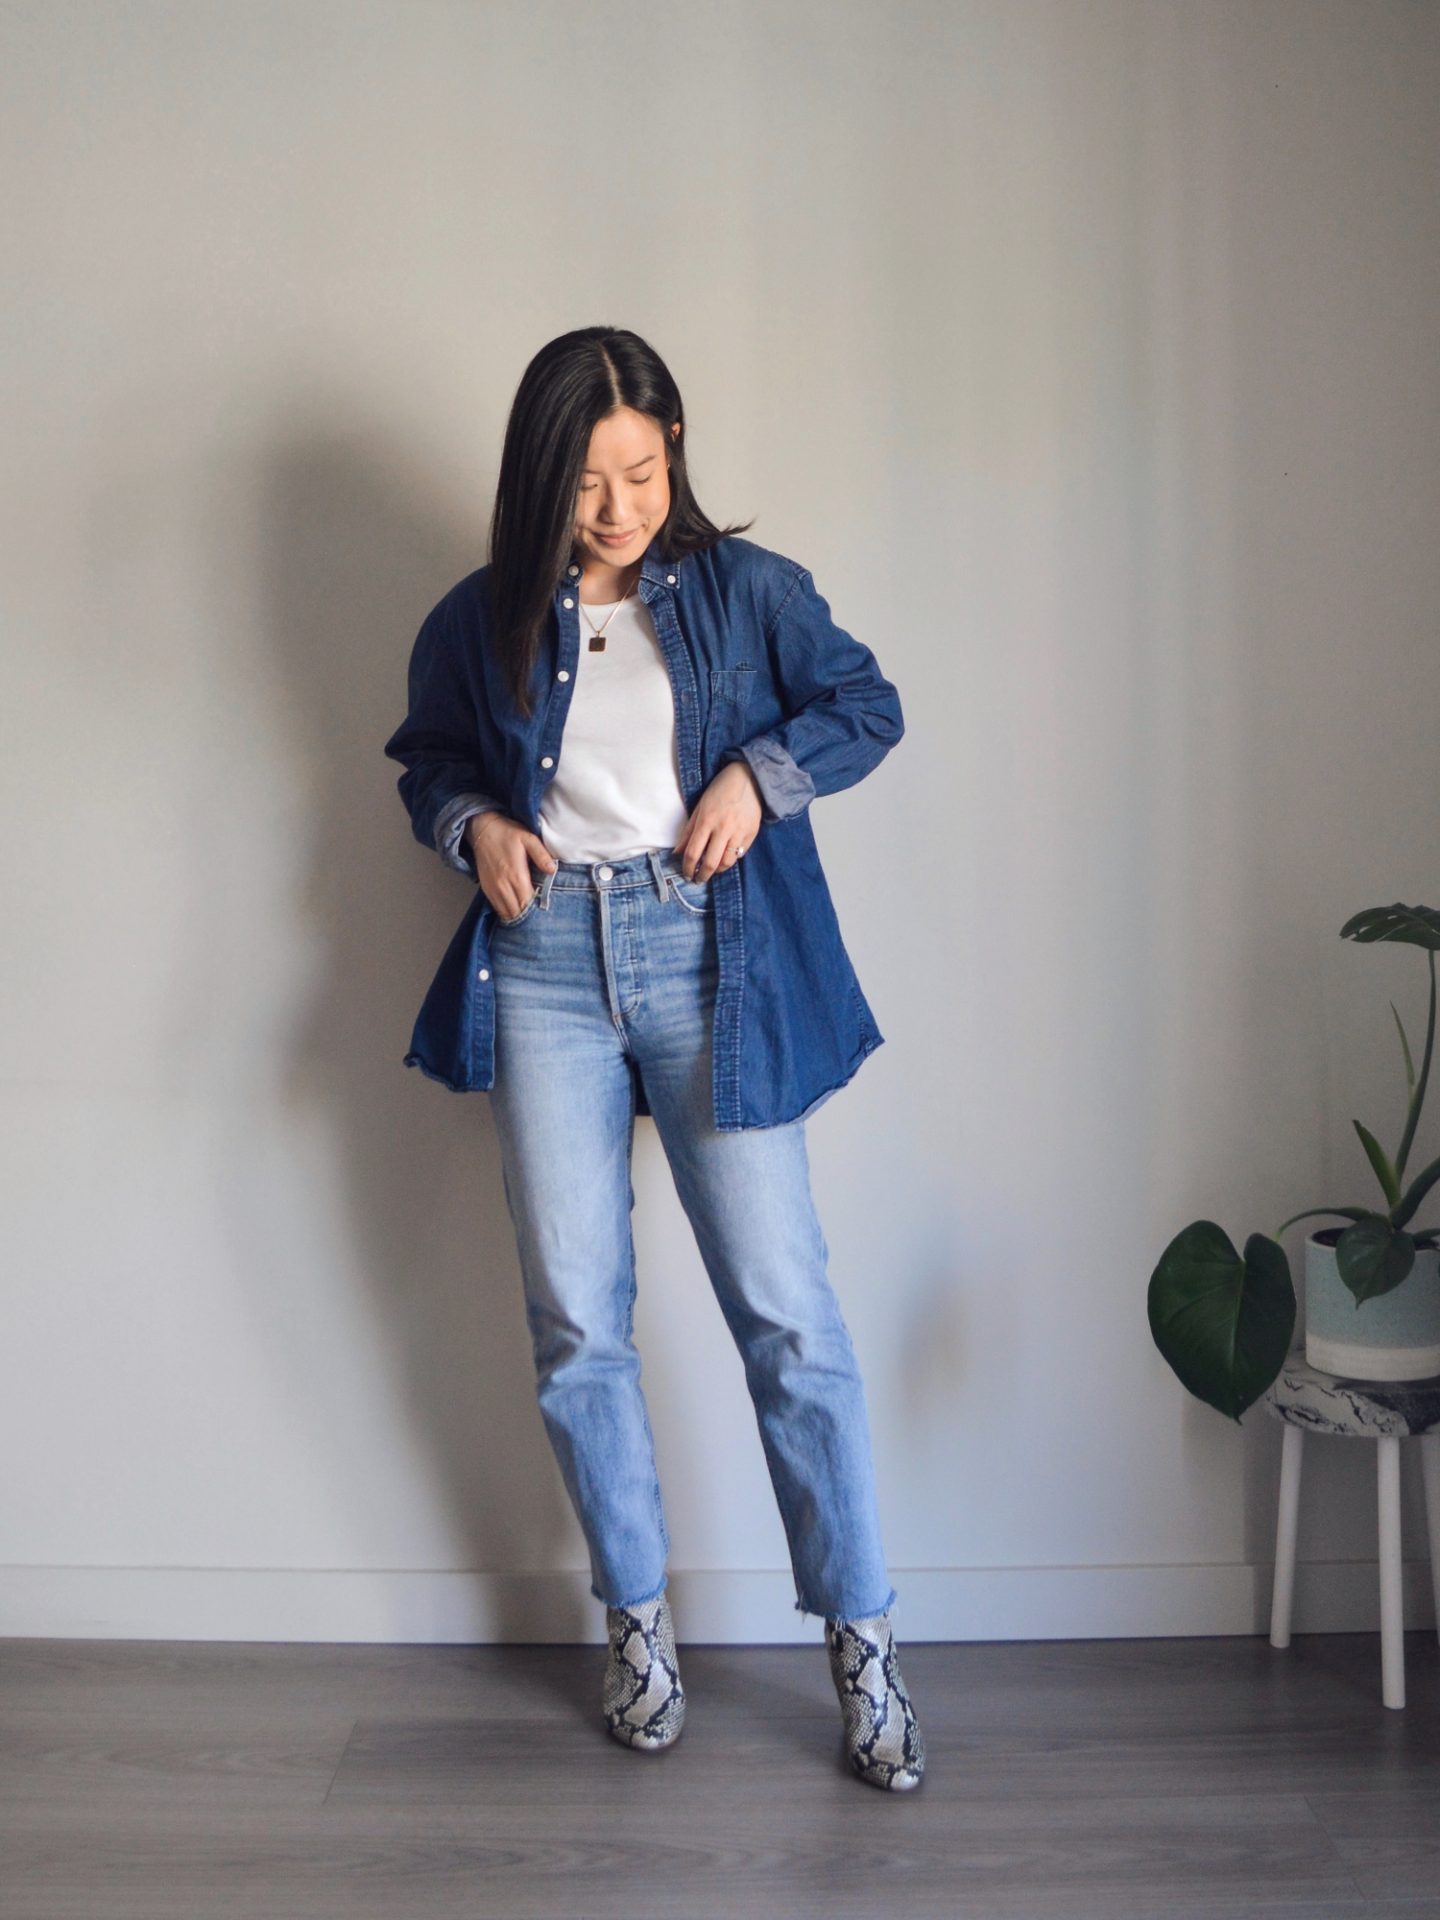 Outfit details: oversized denim shirt, white tank top, blue straight leg jeans, faux snake skin ankle boots